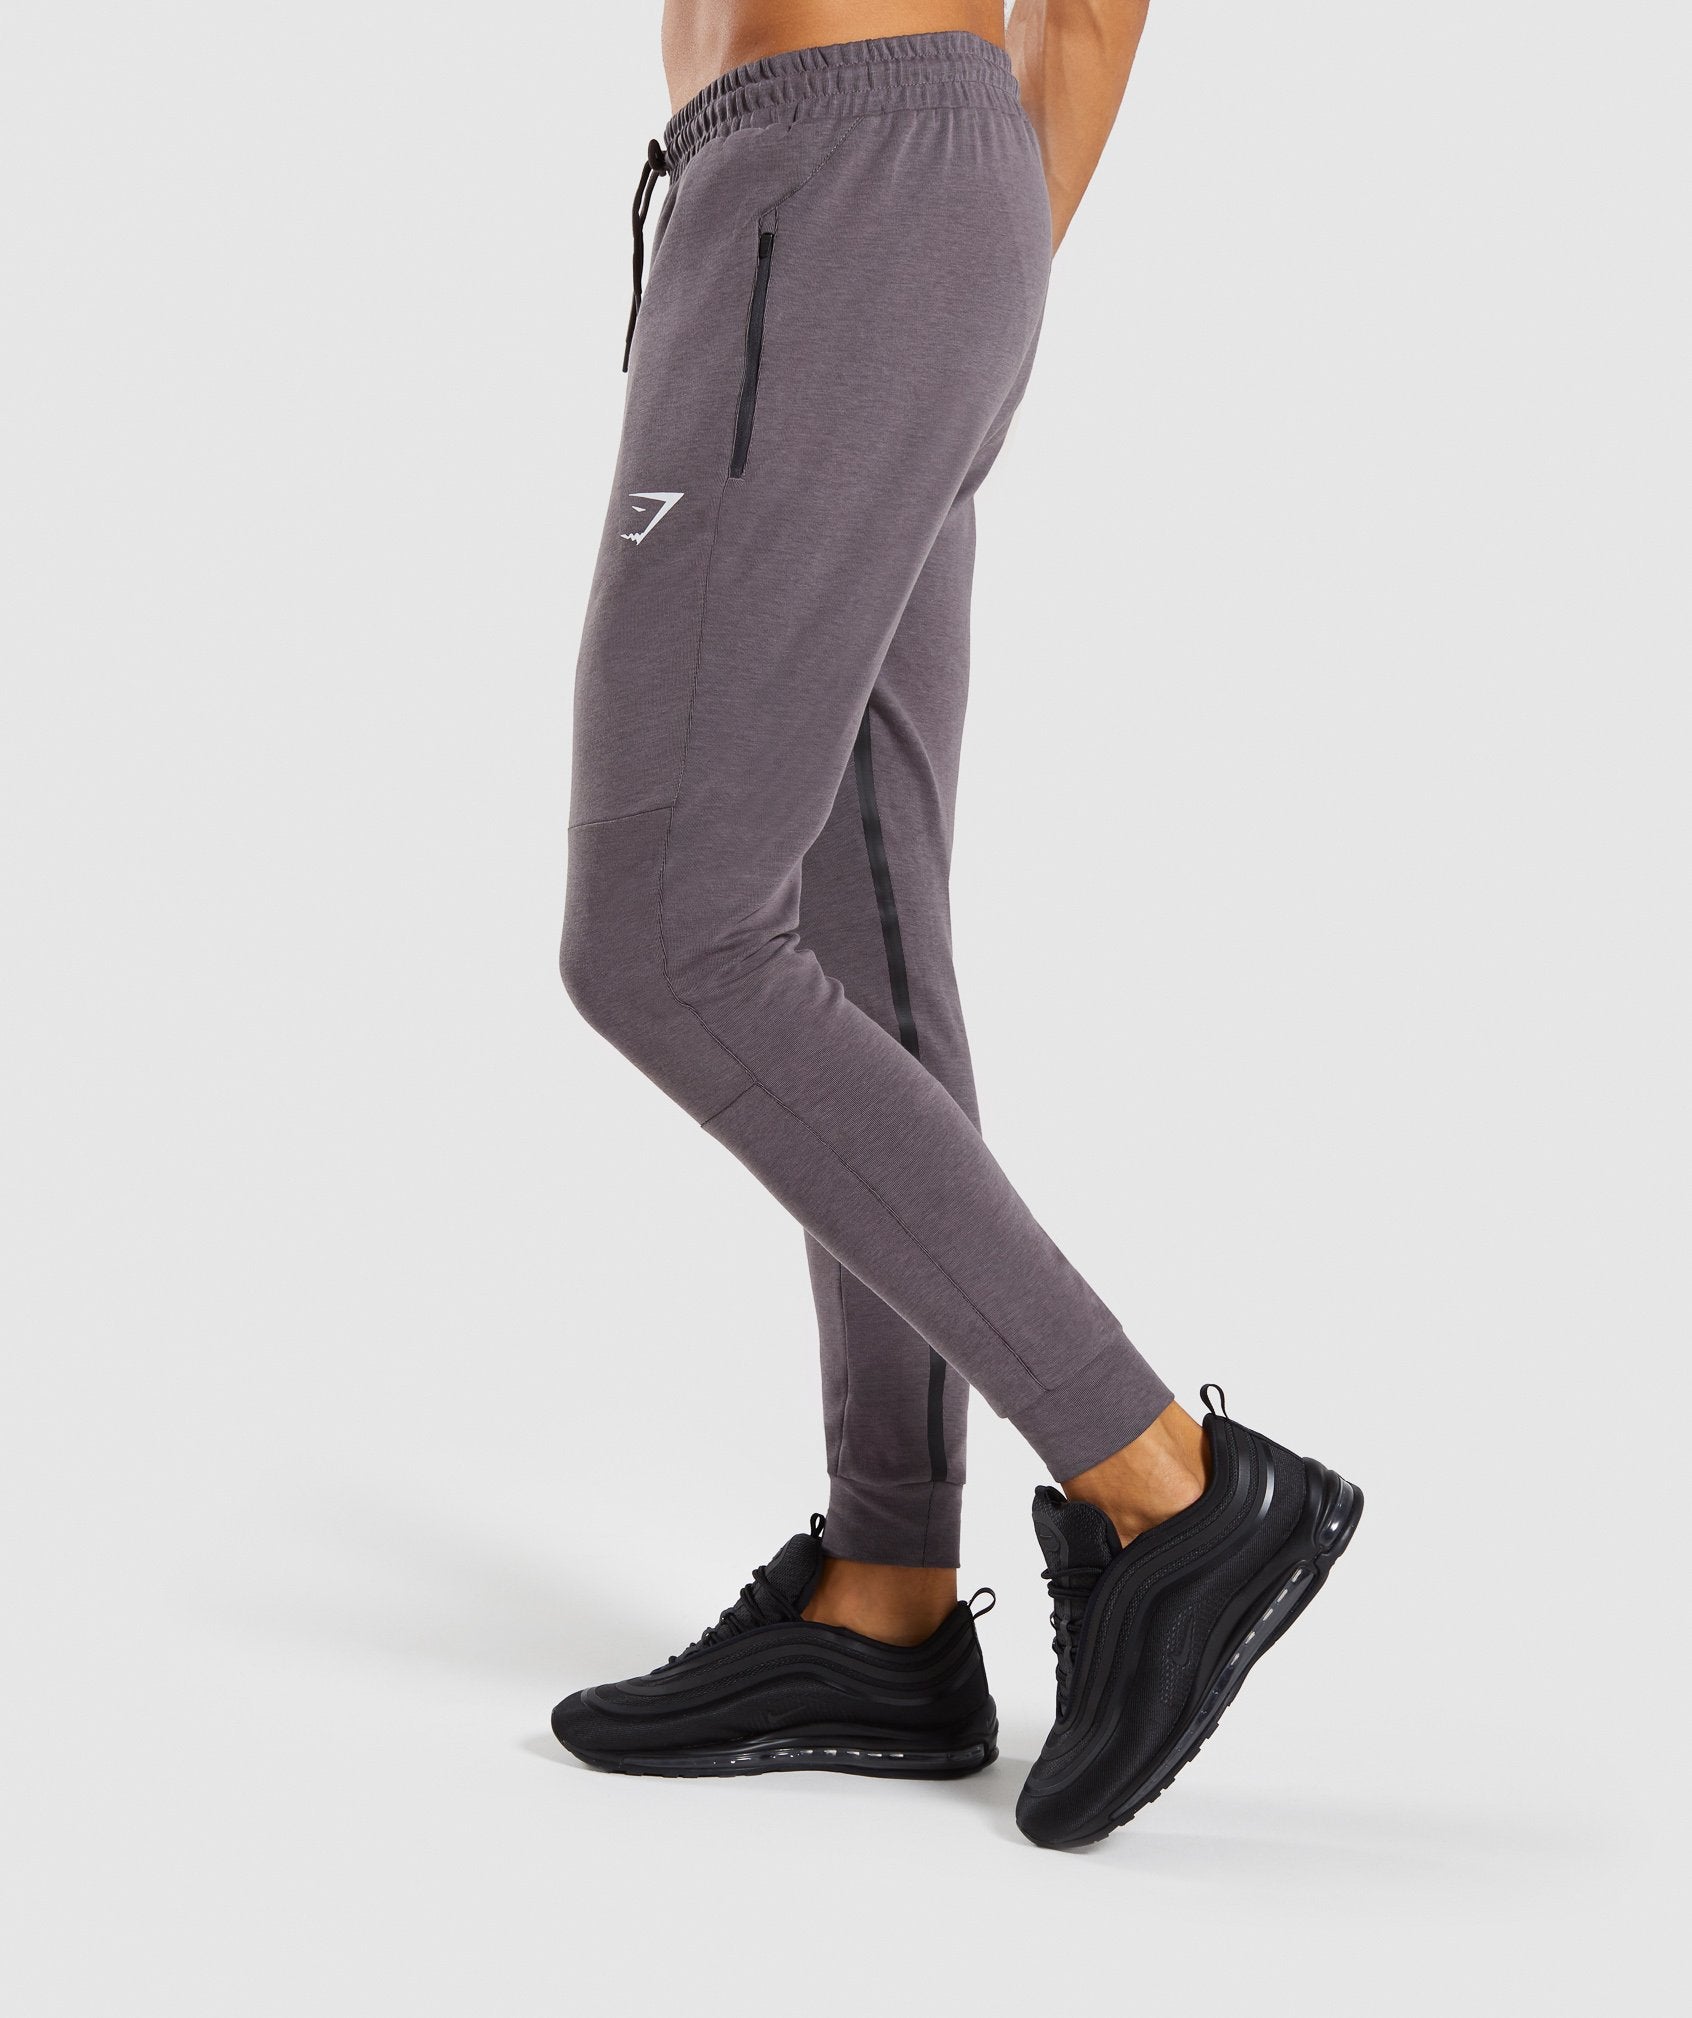 Take Over Bottoms in Slate Lavender Marl - view 3